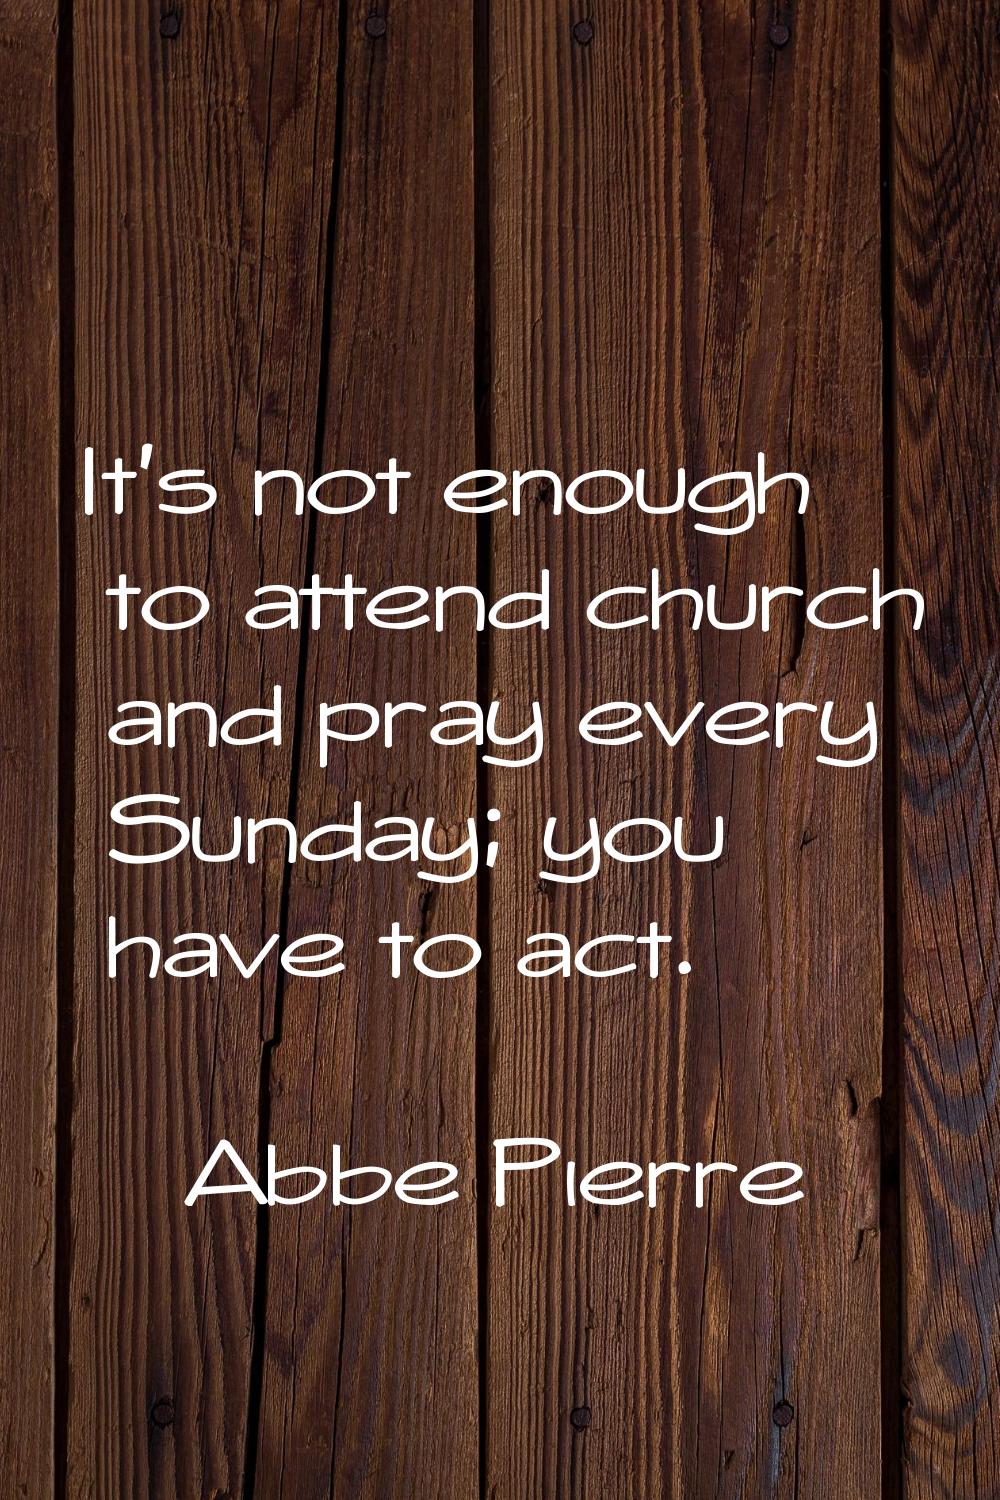 It's not enough to attend church and pray every Sunday; you have to act.